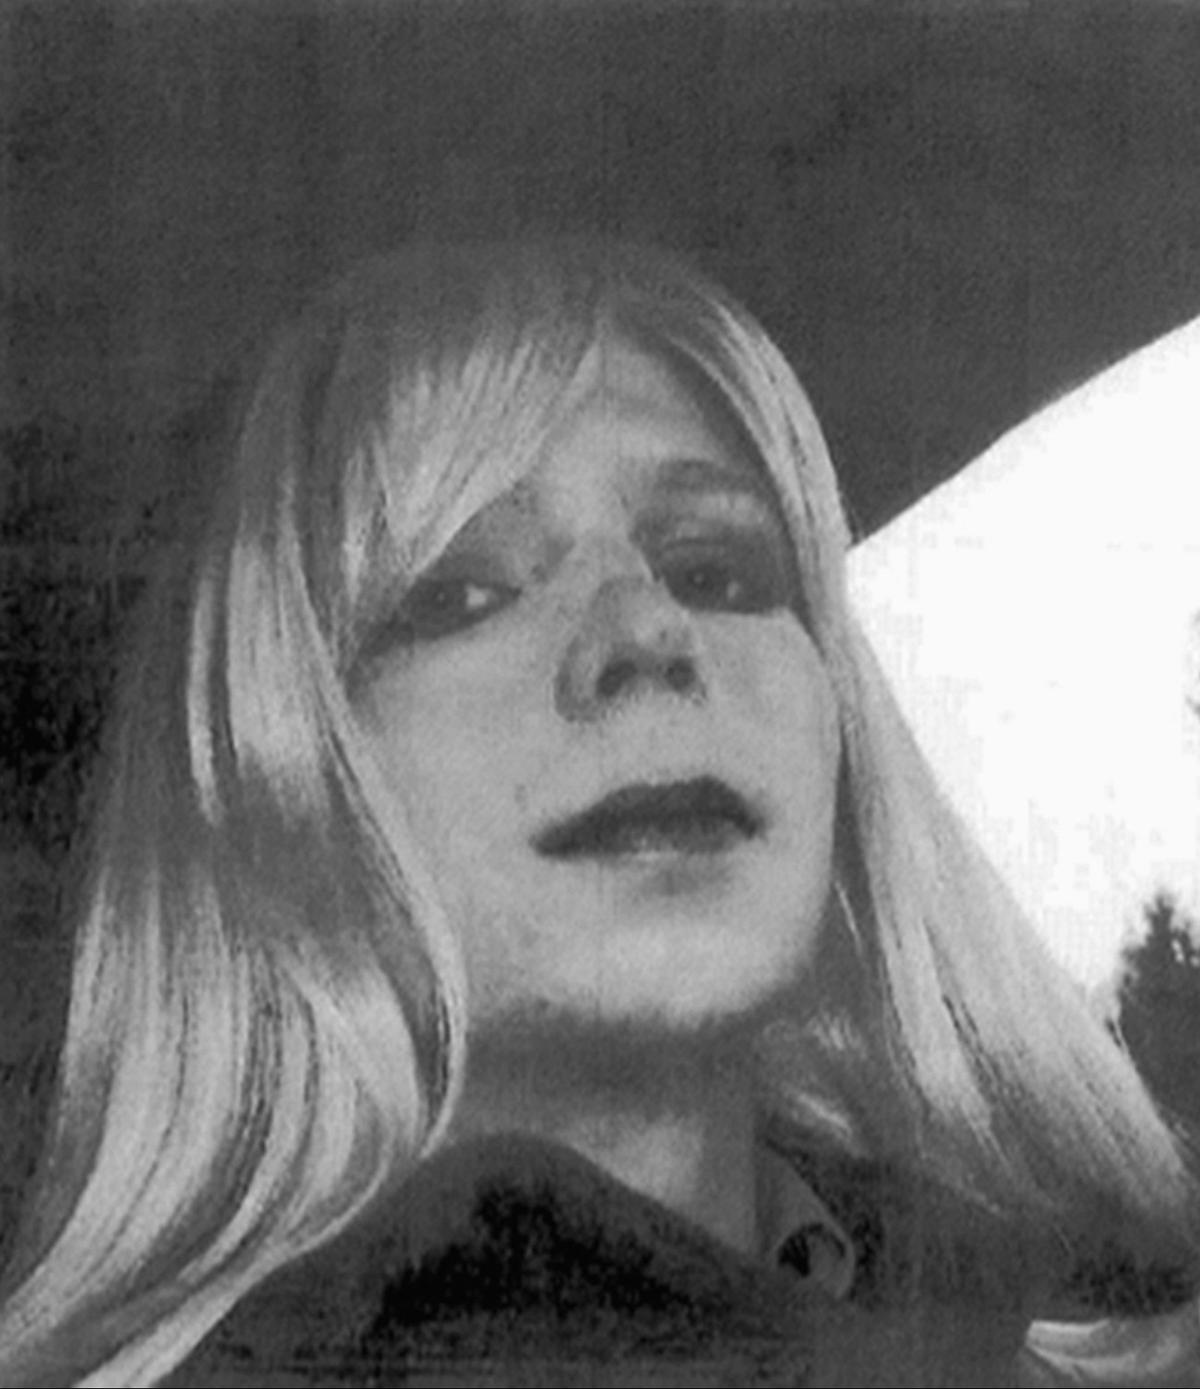 Chelsea Manning poses for a photo, in this file photo. (U.S. Army via AP)